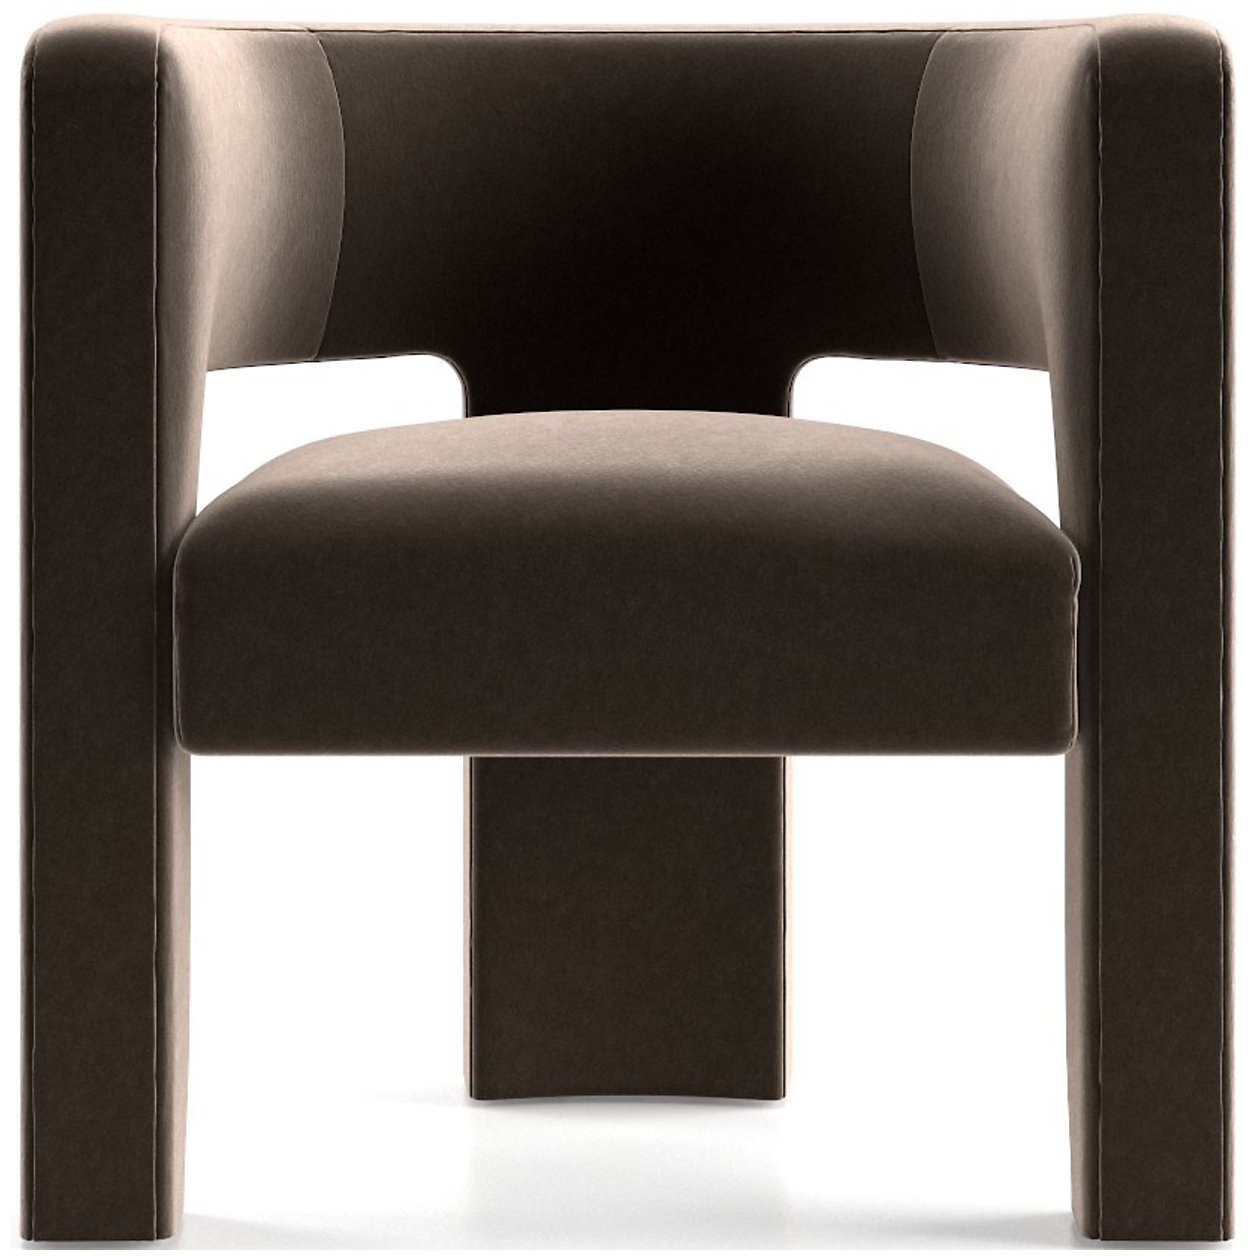 Sculpt Chair - Variety Stone - Image 1